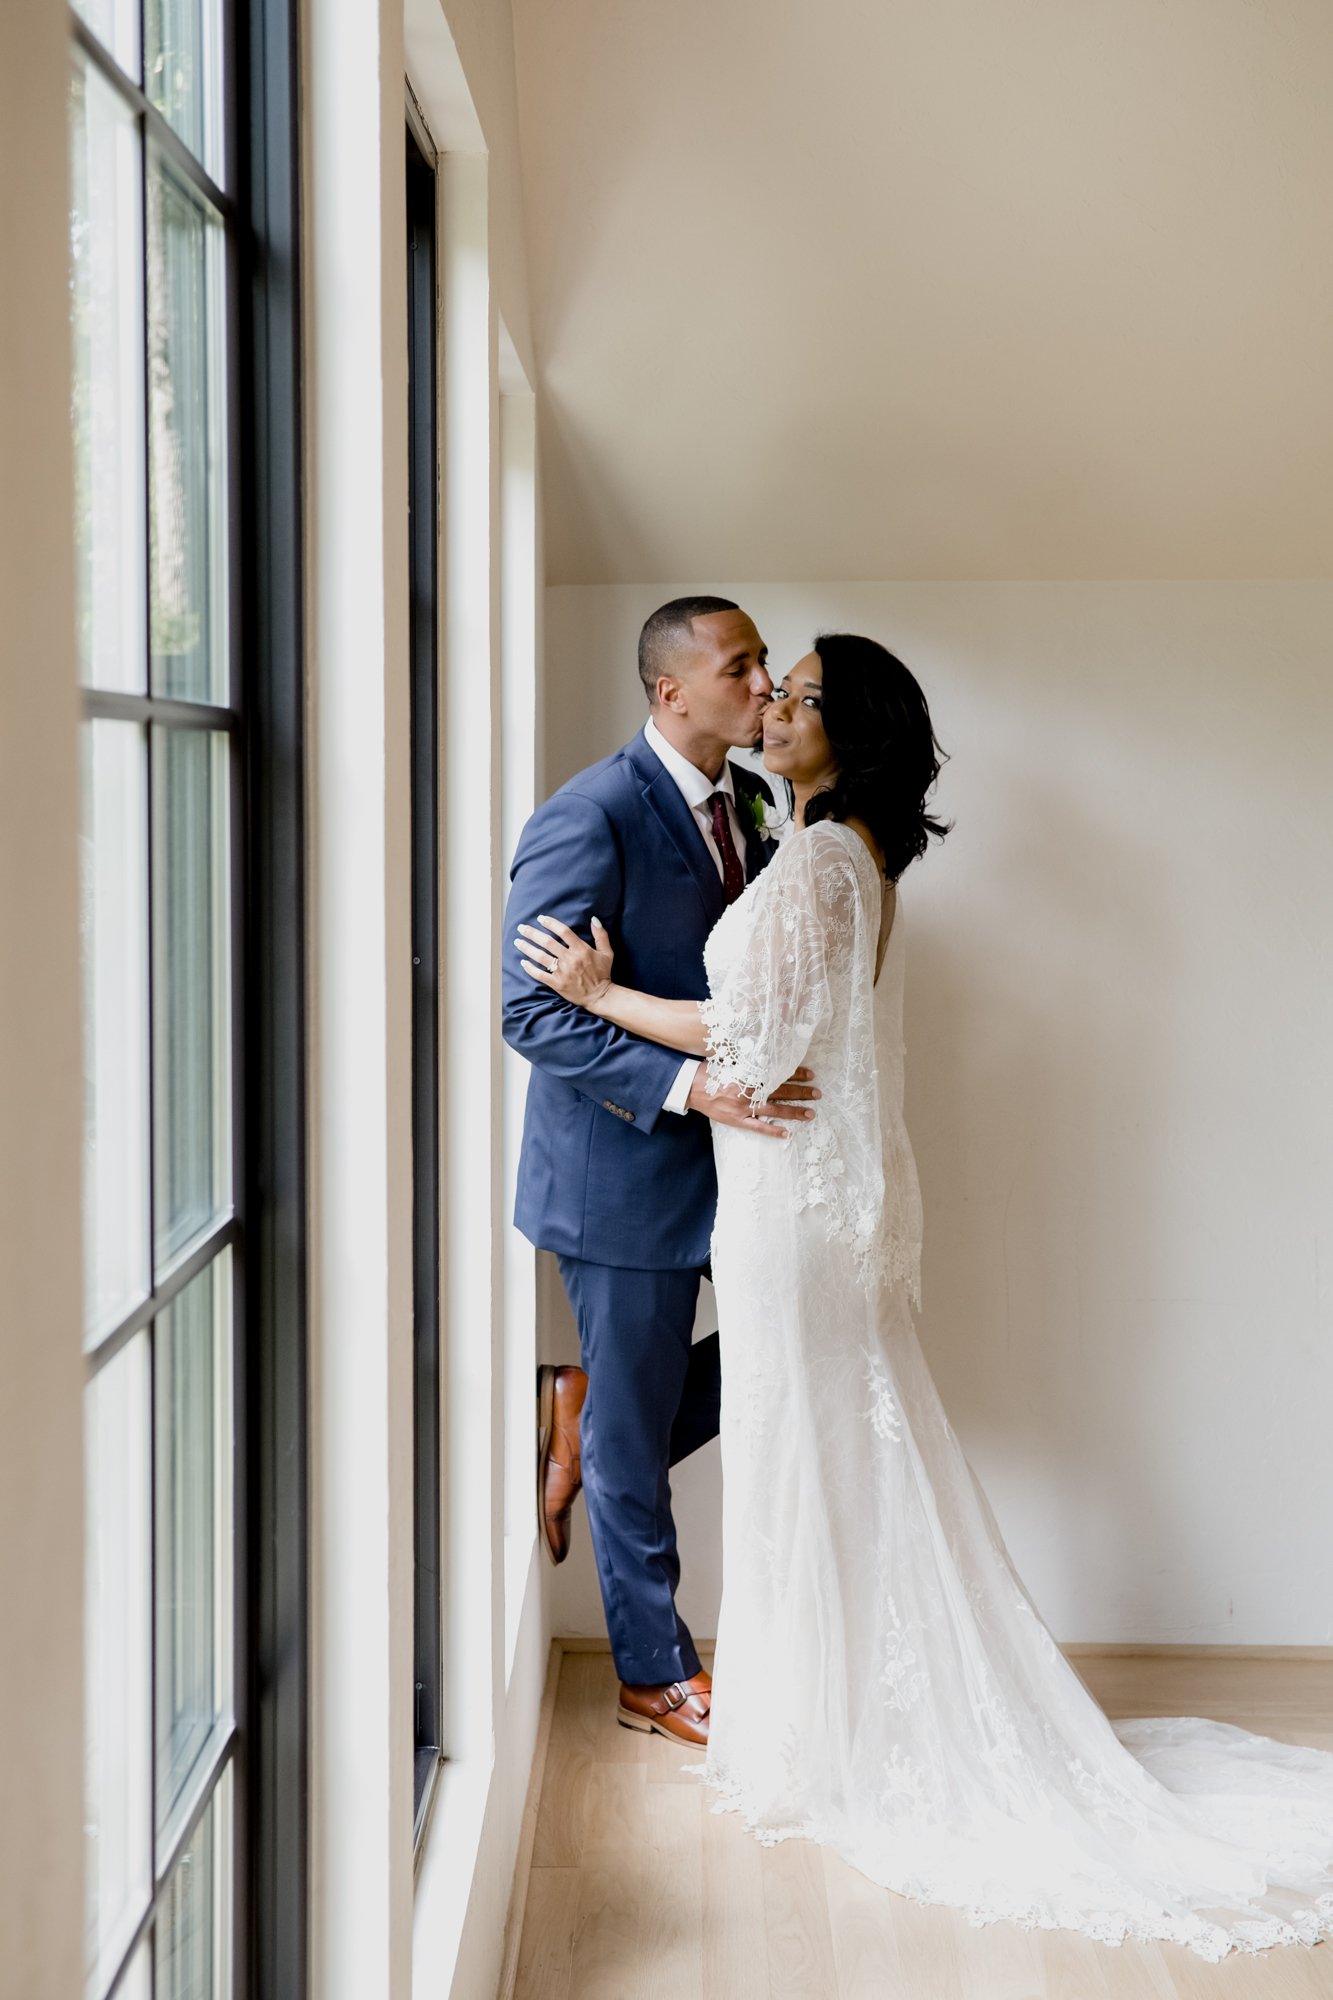 Bride and groom kissing by the window. Wedding at The Oak Atelier